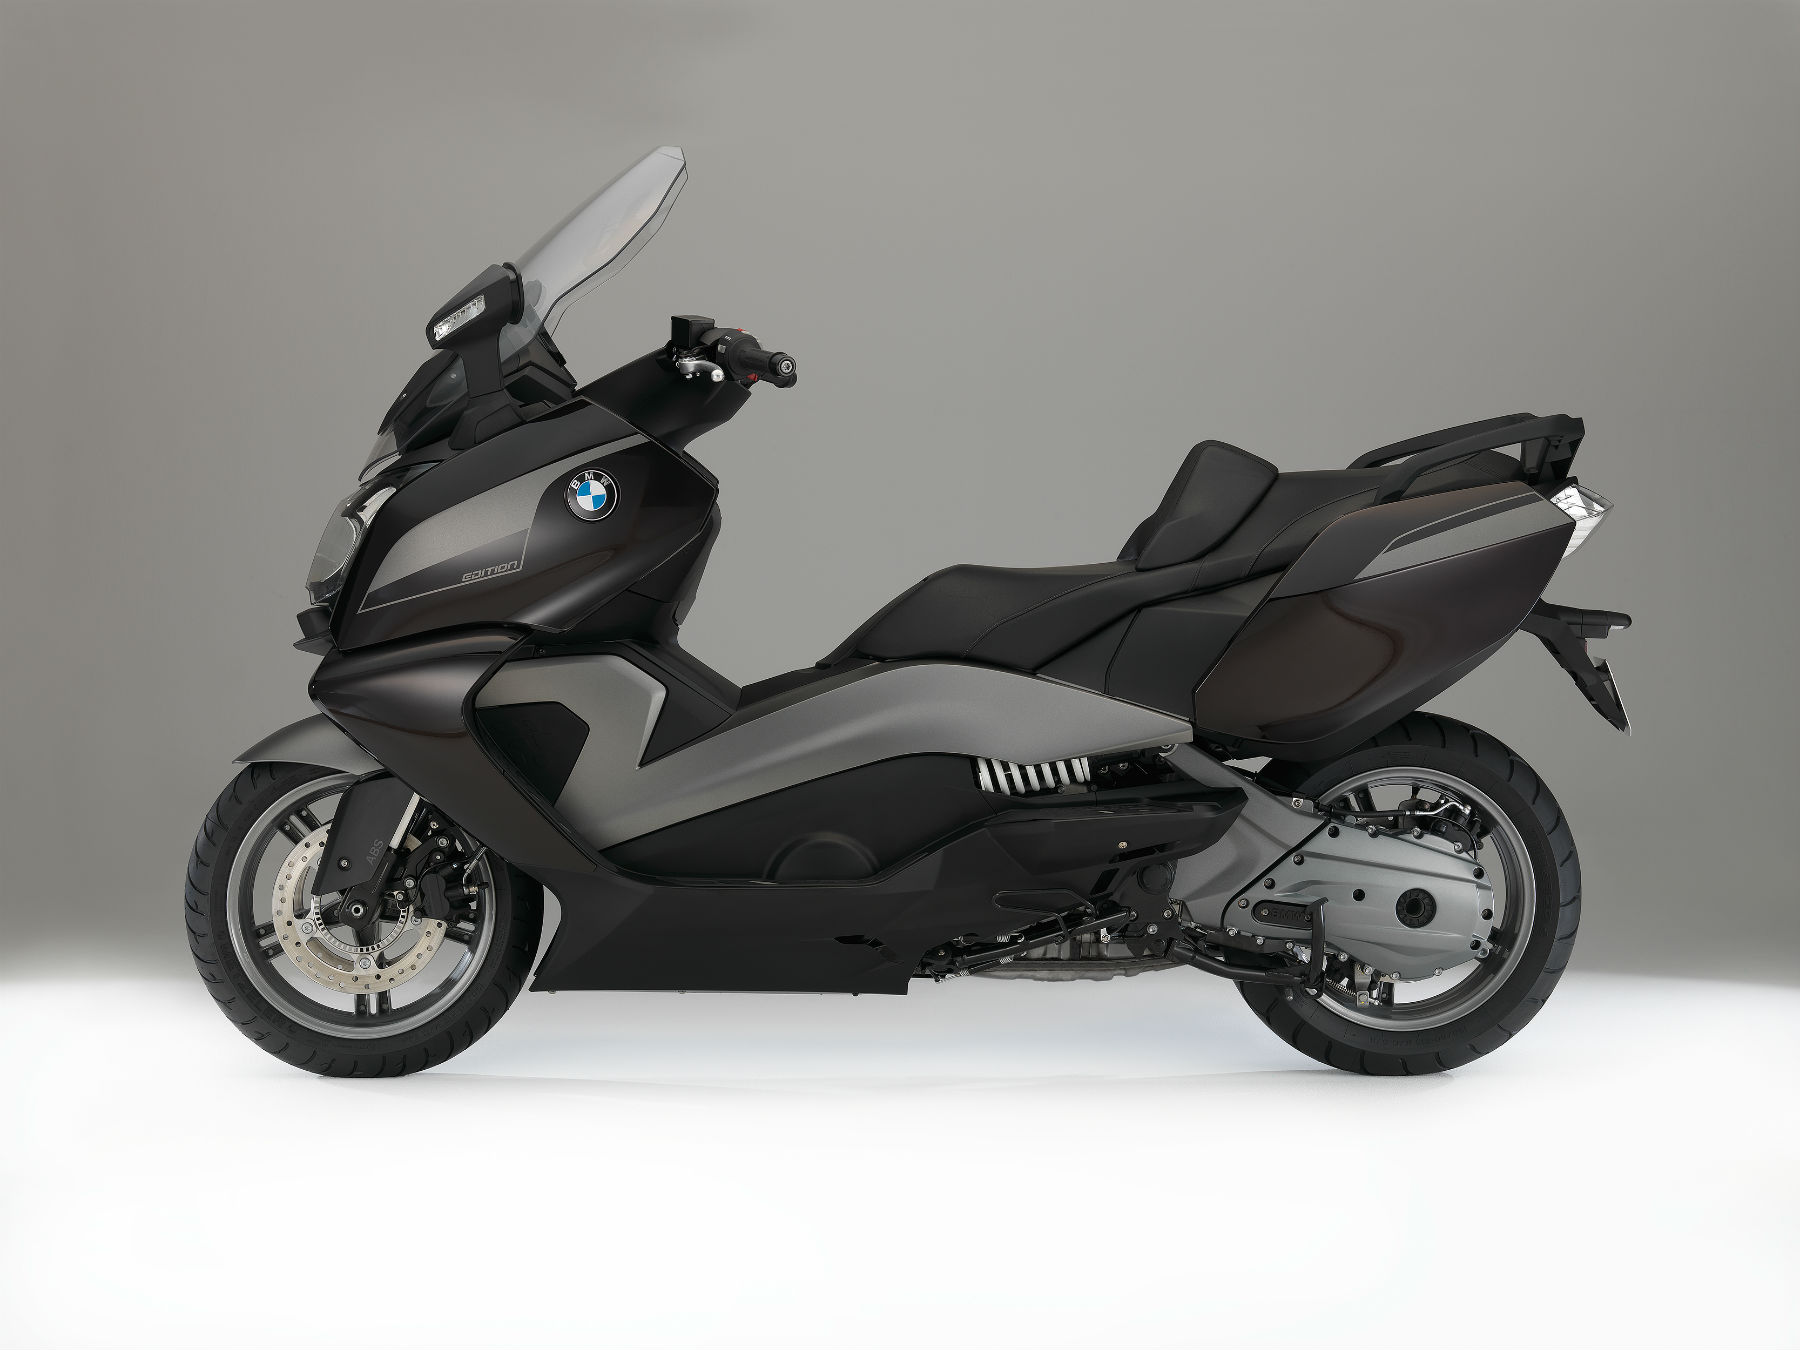 BMW unveil special edition C 600 Sport and C 650 GT